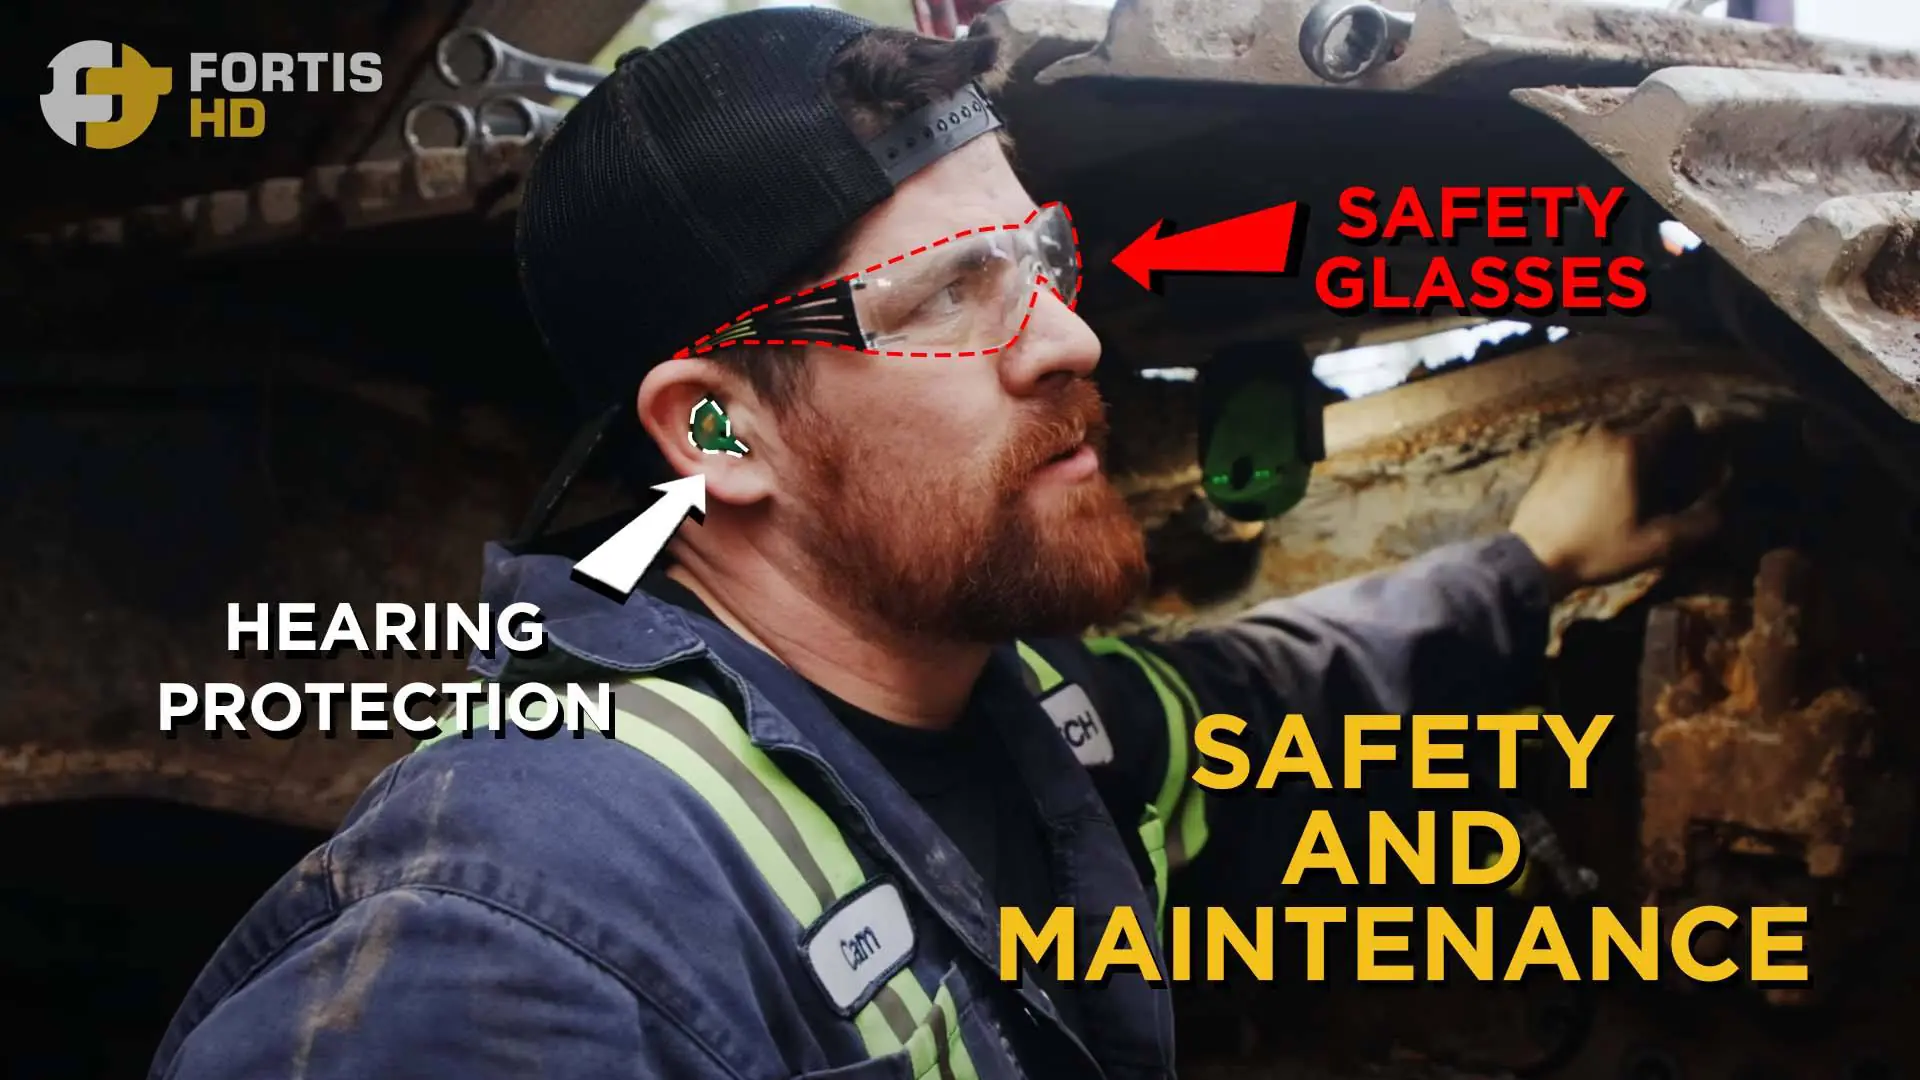 A heavy-duty mechanic wears safety glasses and hearing protection while working on a final drive.